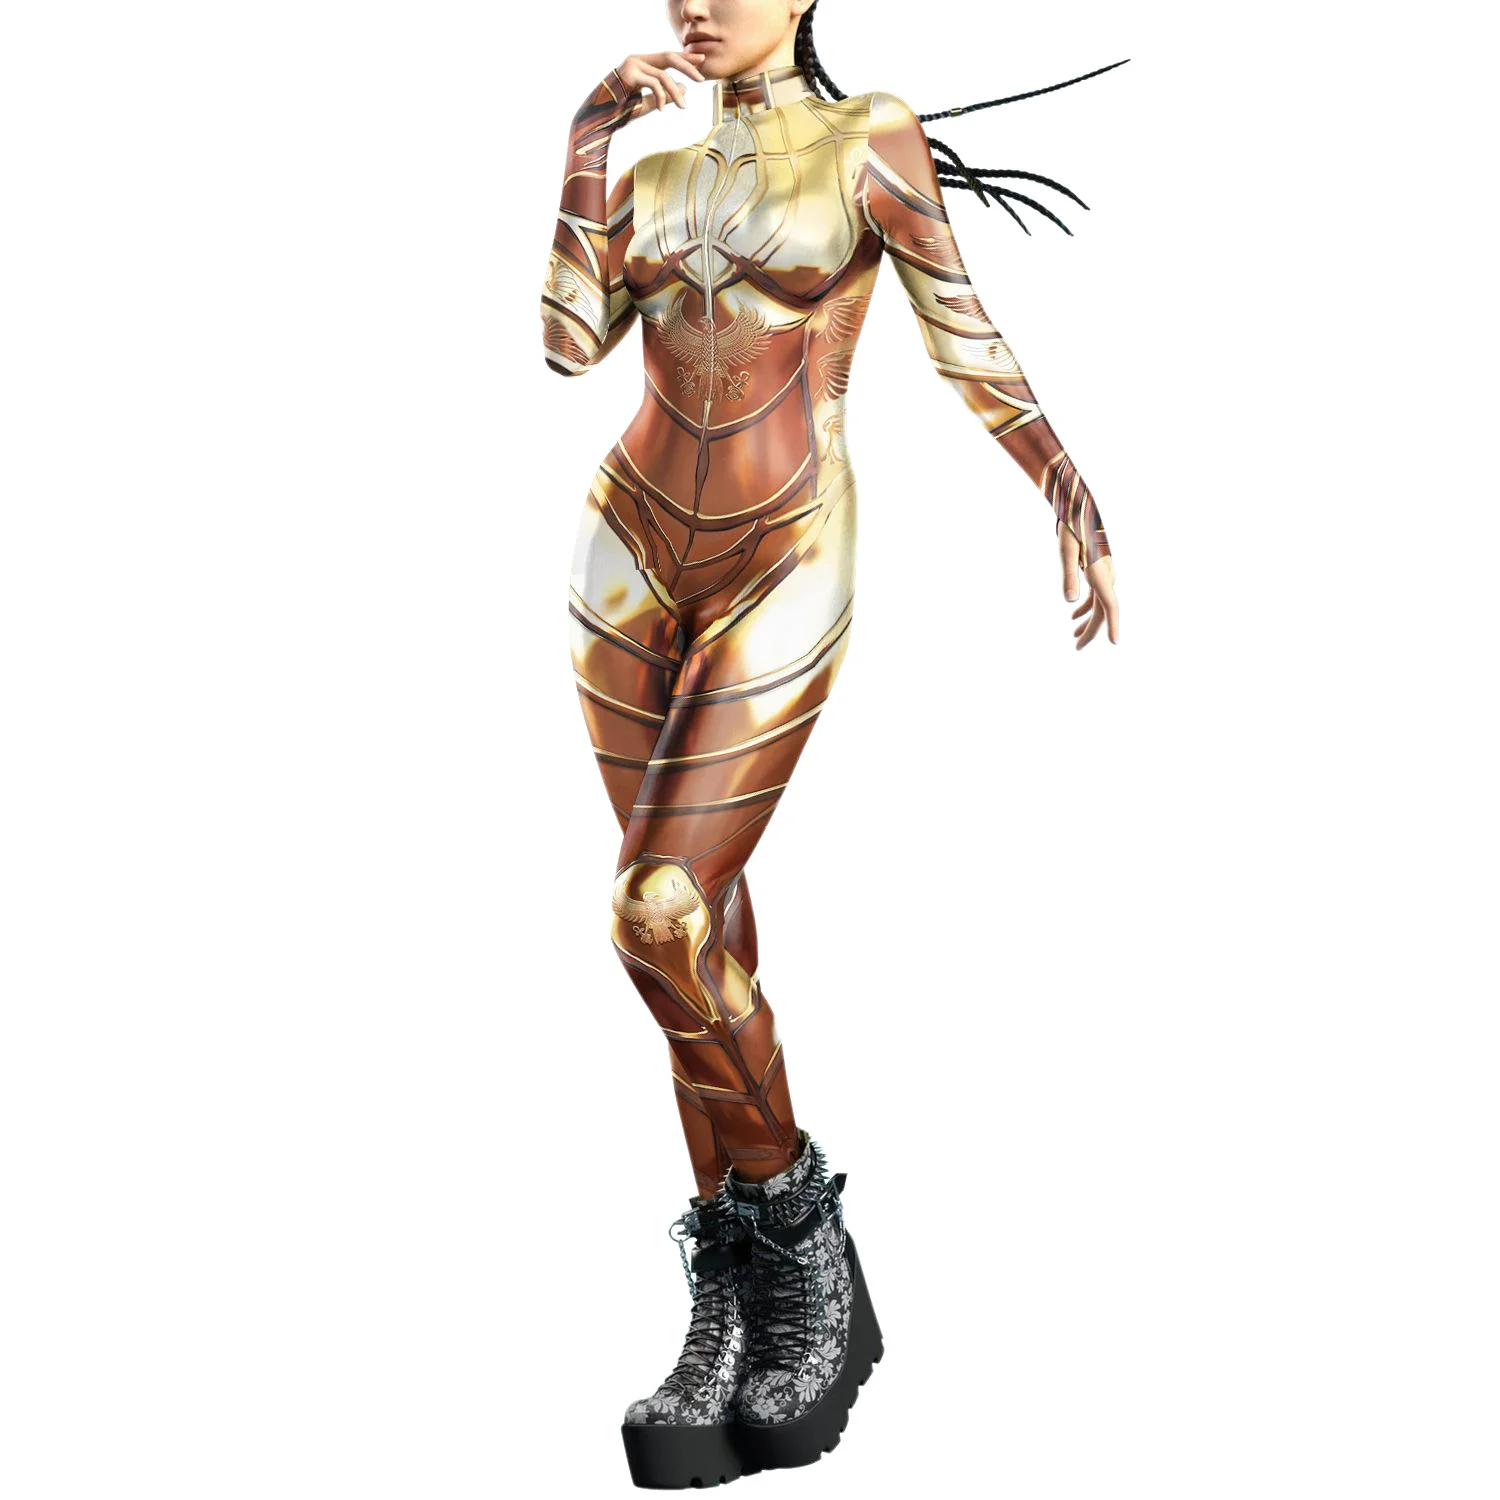 

Zawaland New Woman Jumpsuit Punk Cosplay Costume Gold Egyptian Pharaoh Sexy Front Zipper Zentai Bodysuits Halloween Party Outfit